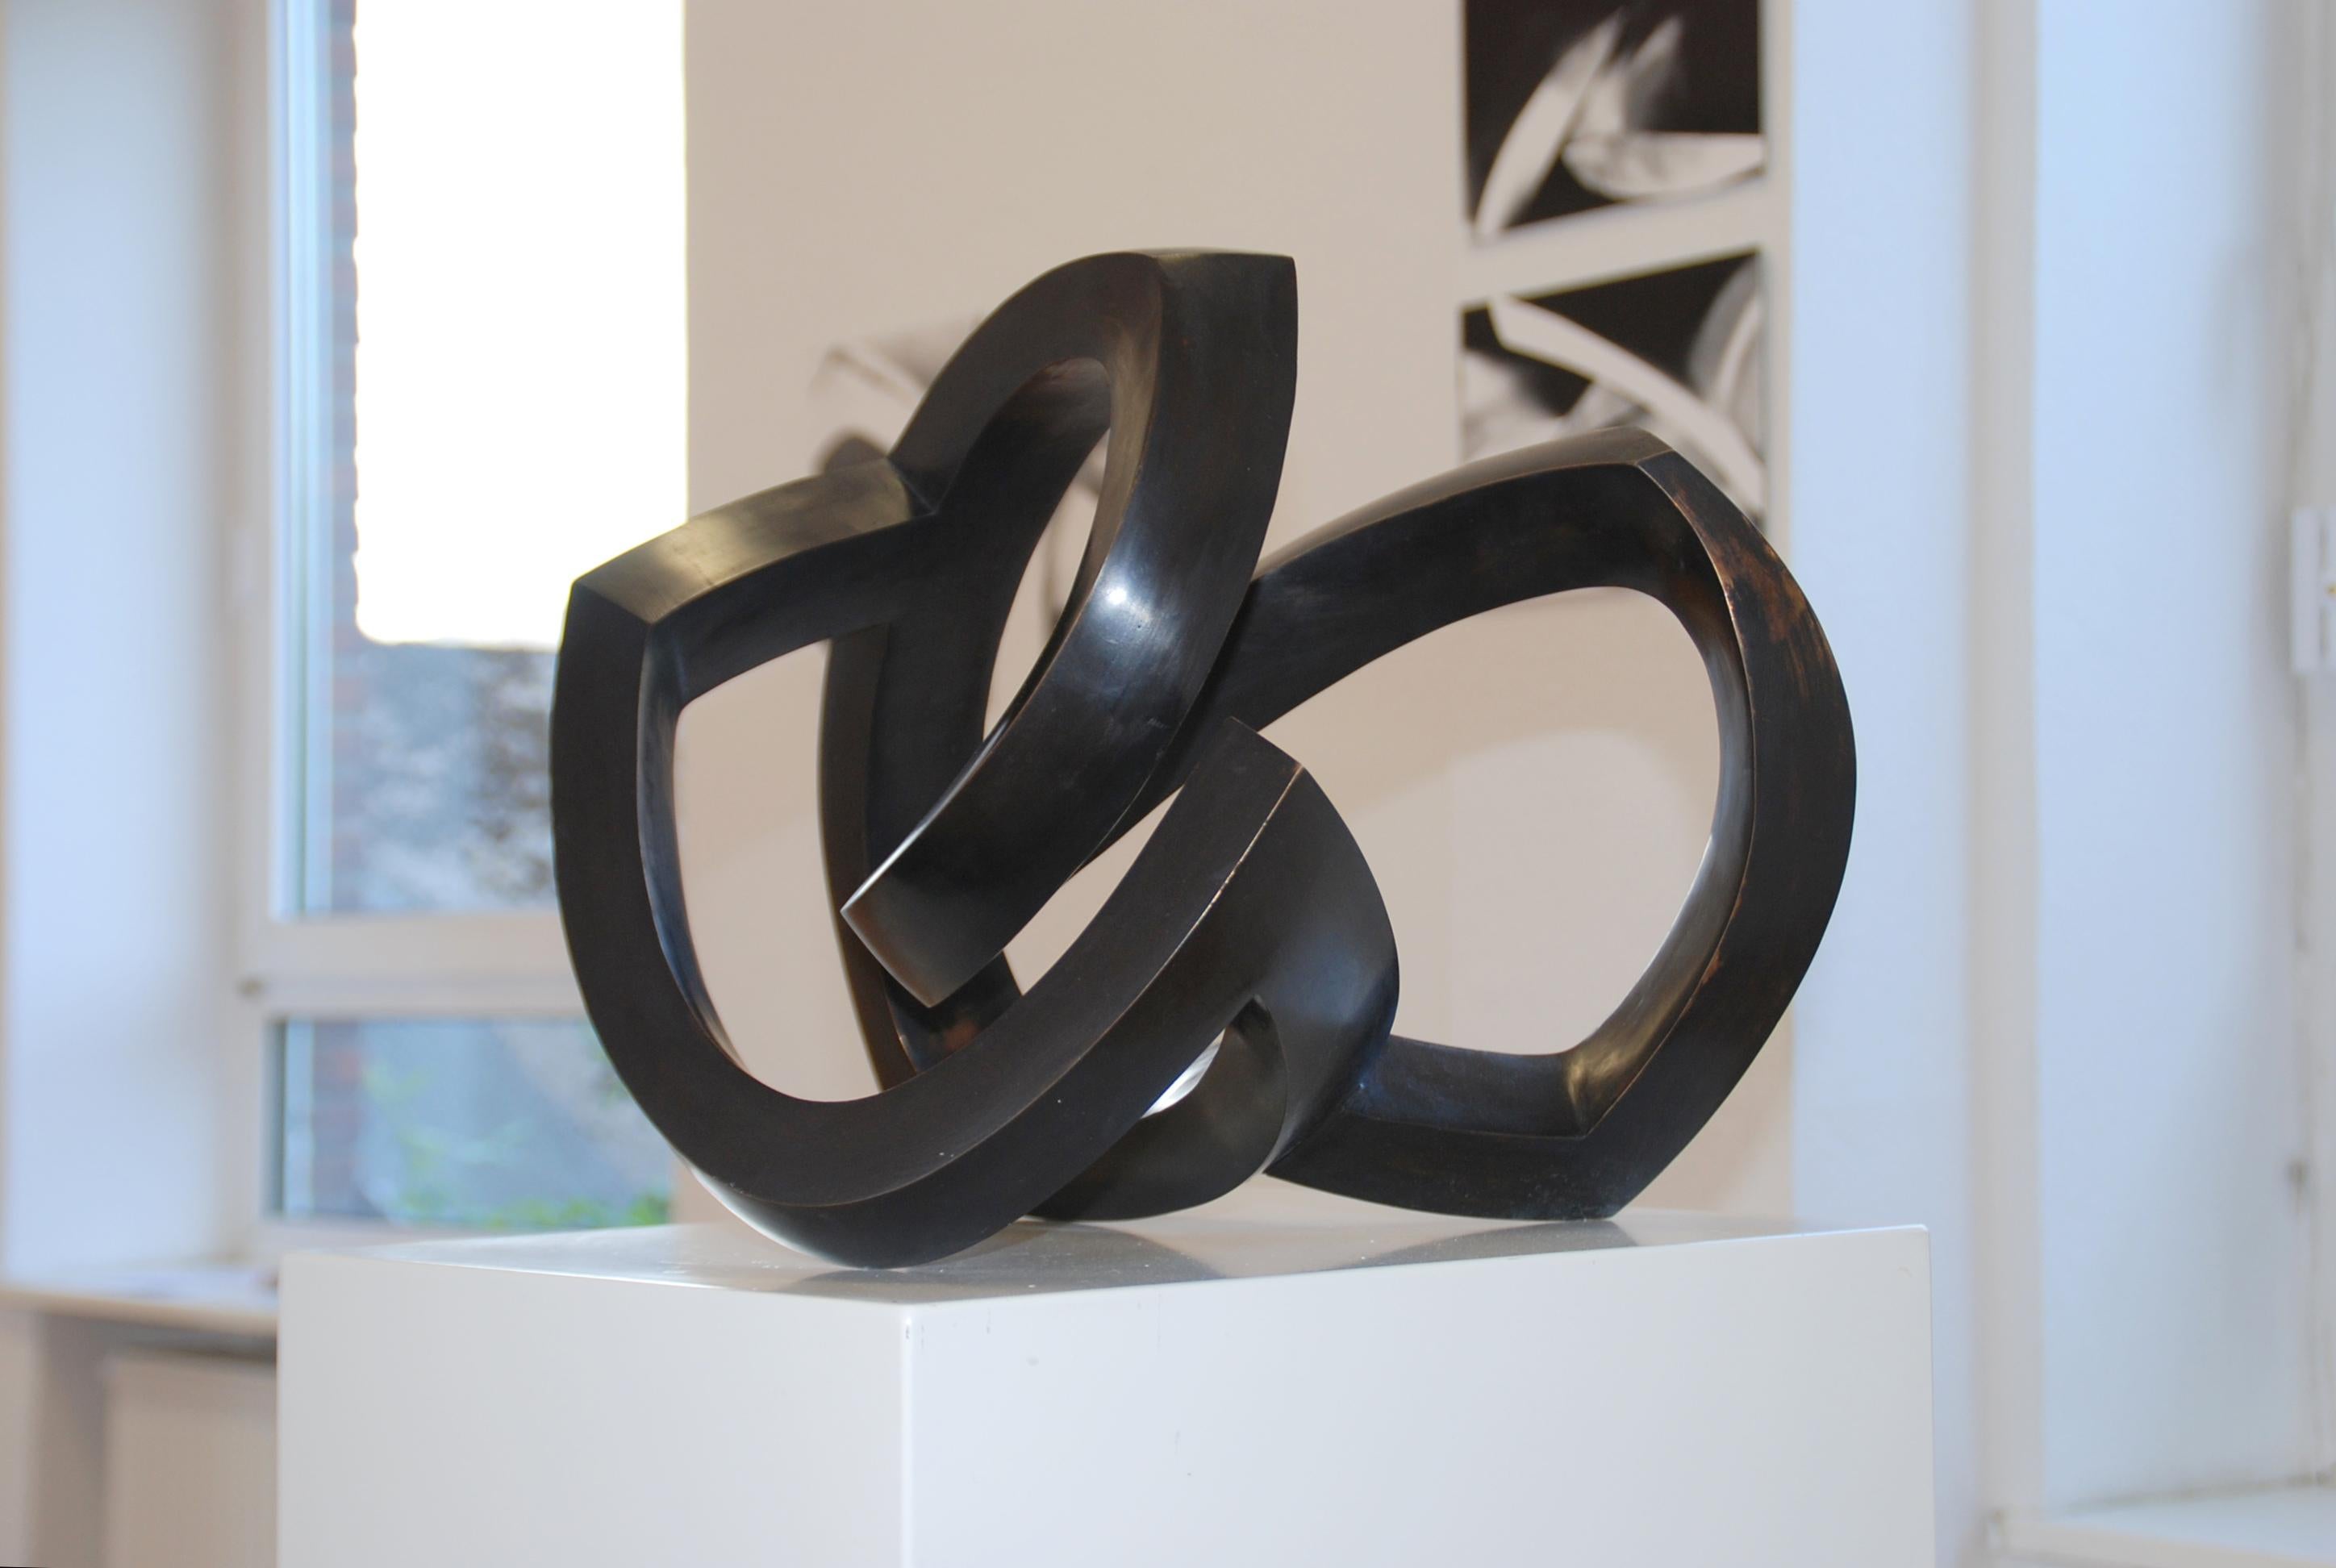 Bronze Black Sculpture 'O.T. VI' by Carola Eggeling
Abstract sculpture with beautiful curved lines.

German bronze black sculpture
Certificate of authenticity
Numbered and signed artwork
Limited edition of 6
Measures: H. 31 x 38 x 34 cm

Eggeling's